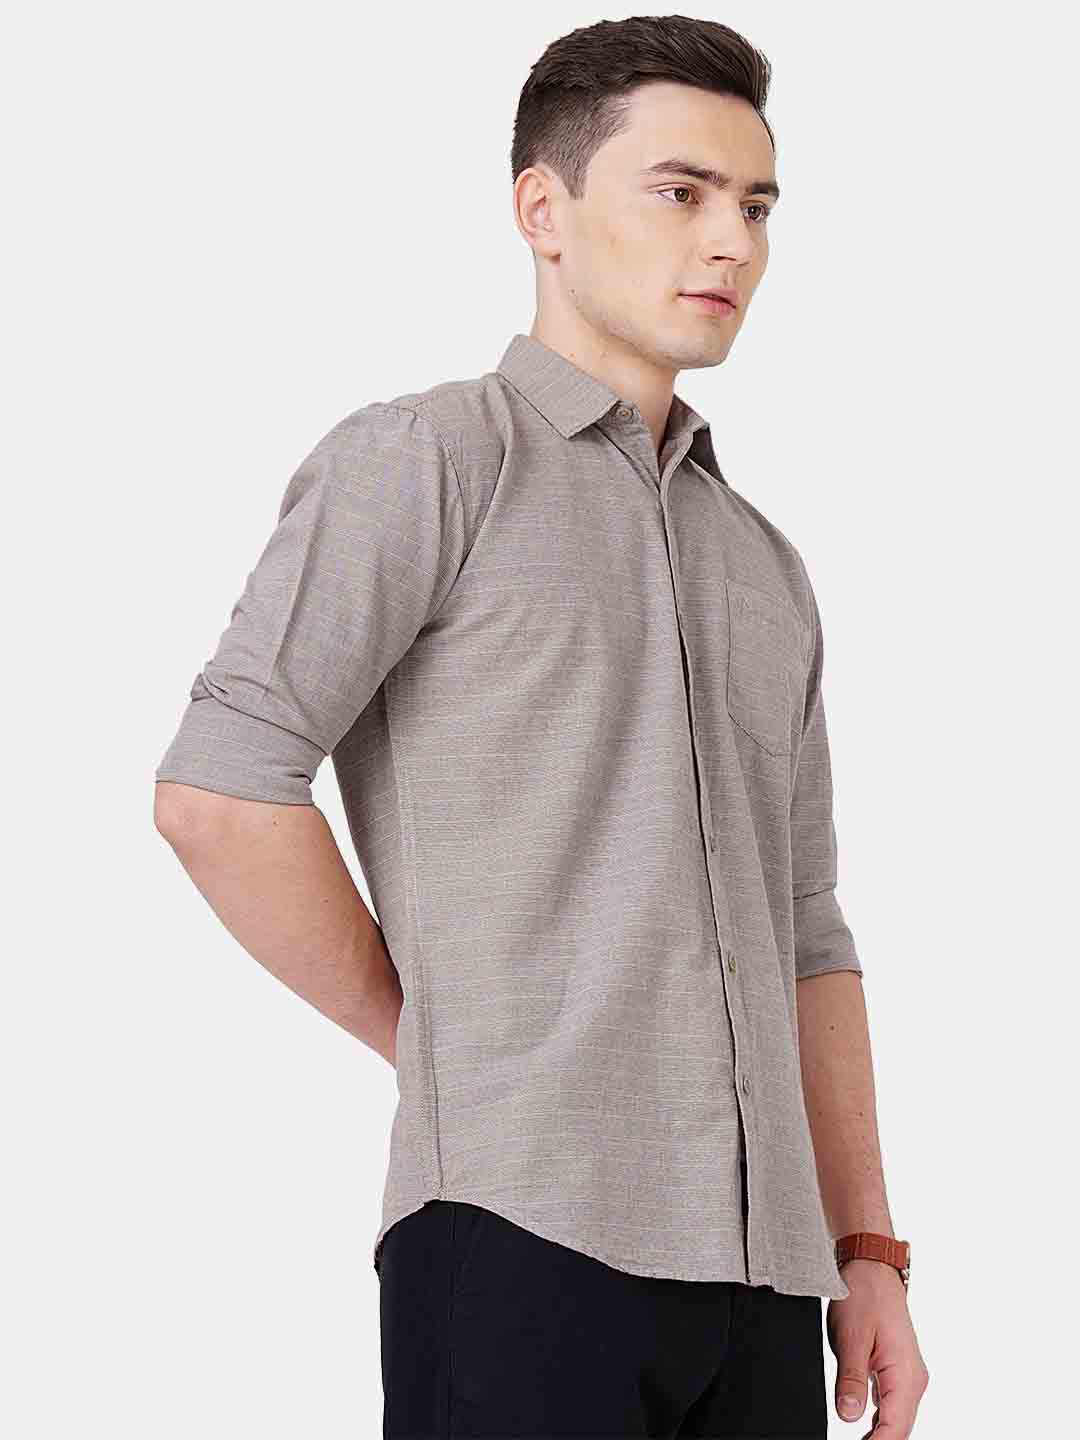 Silver Chalice Textured Shirt